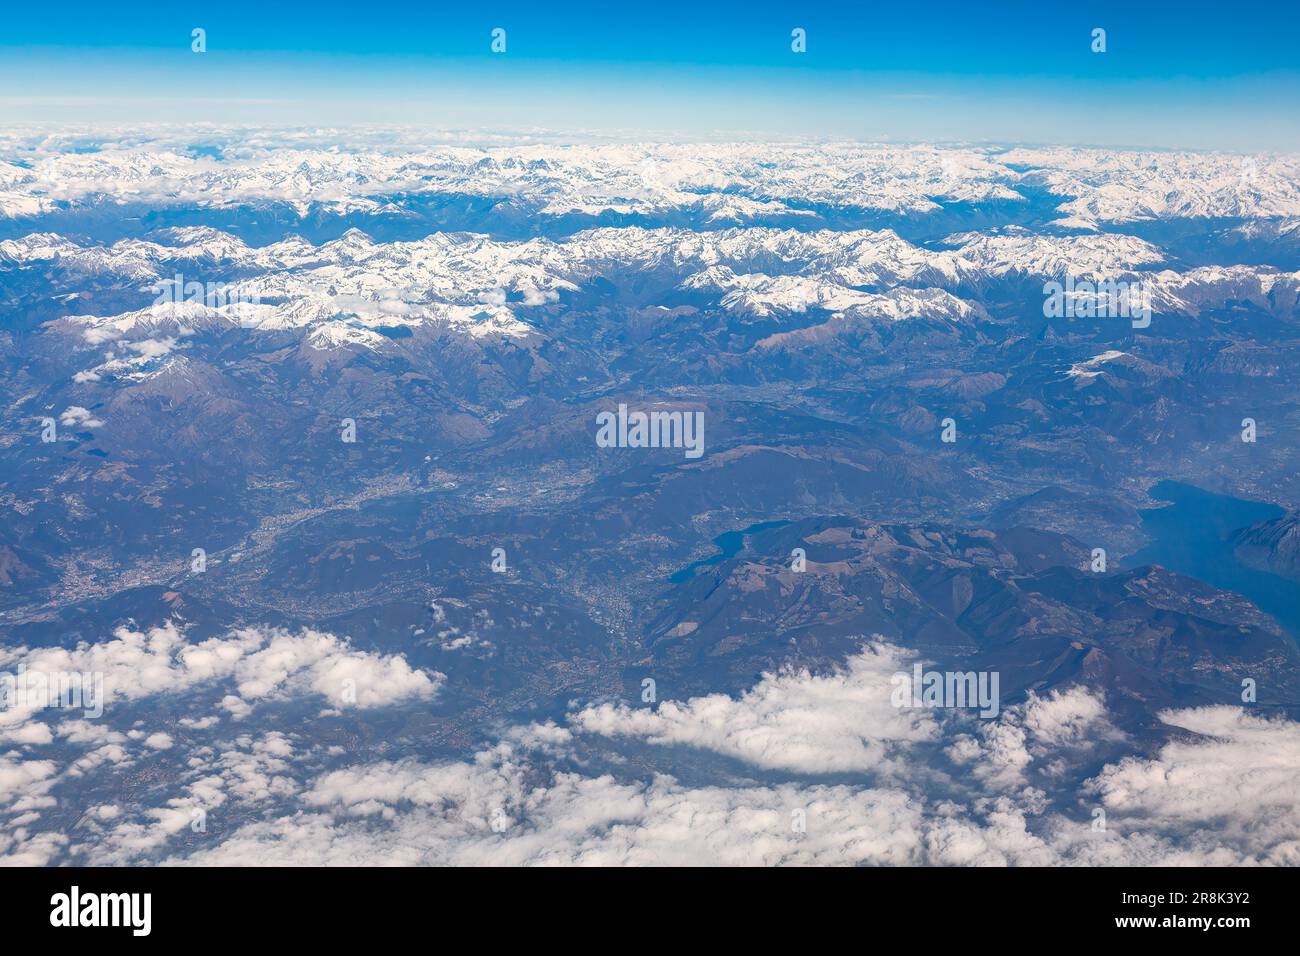 Aerial view of mountain range with snowy peaks . Clouds and blue sky as seen through window of an aircraft Stock Photo